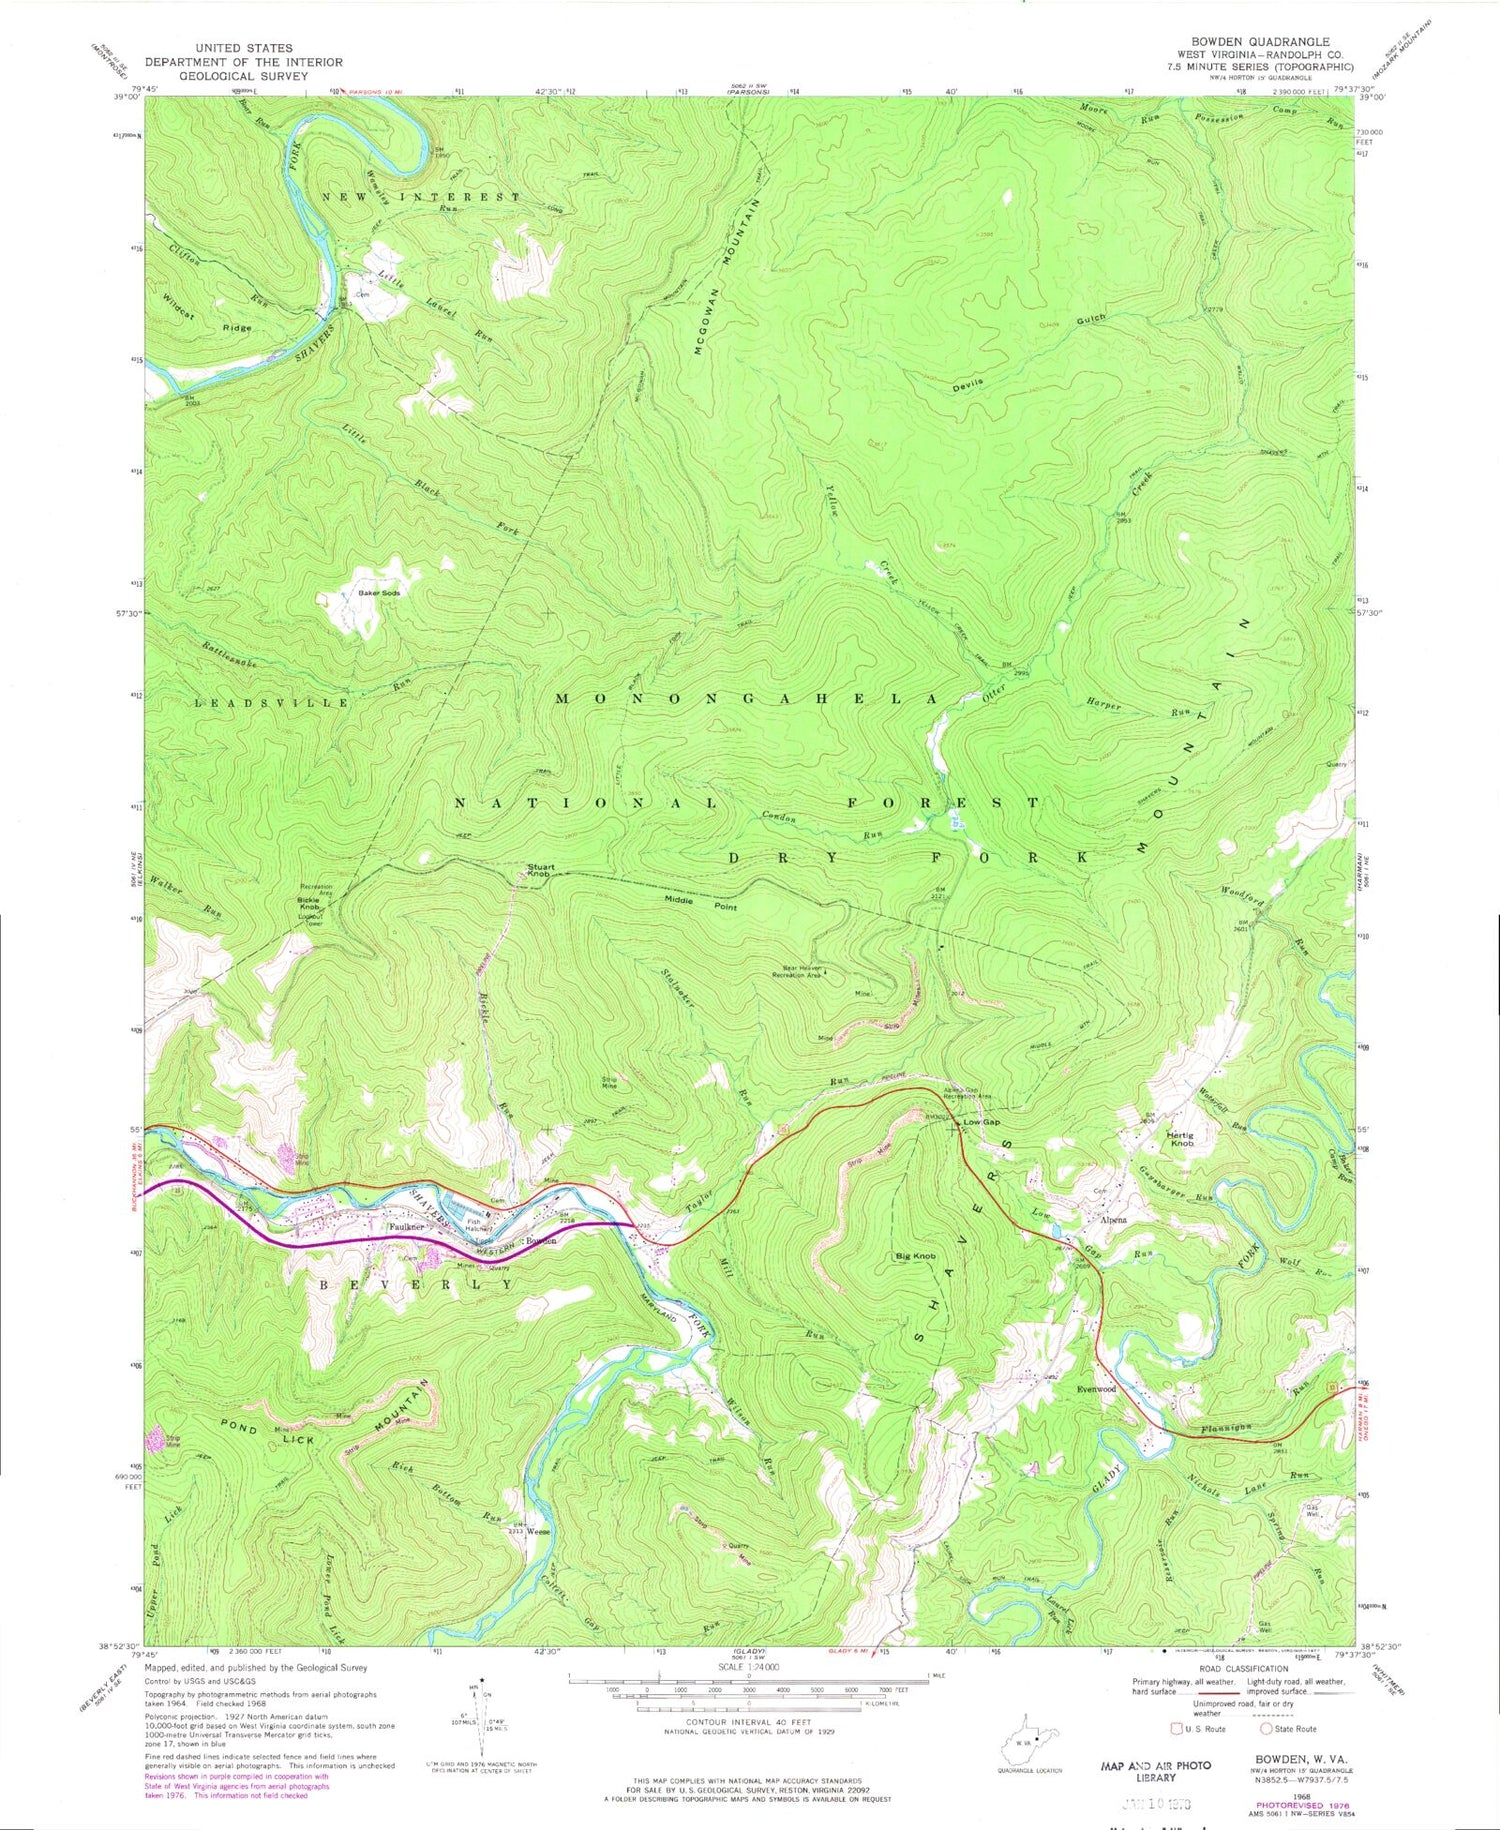 USGS Classic Bowden West Virginia 7.5'x7.5' Topo Map Image